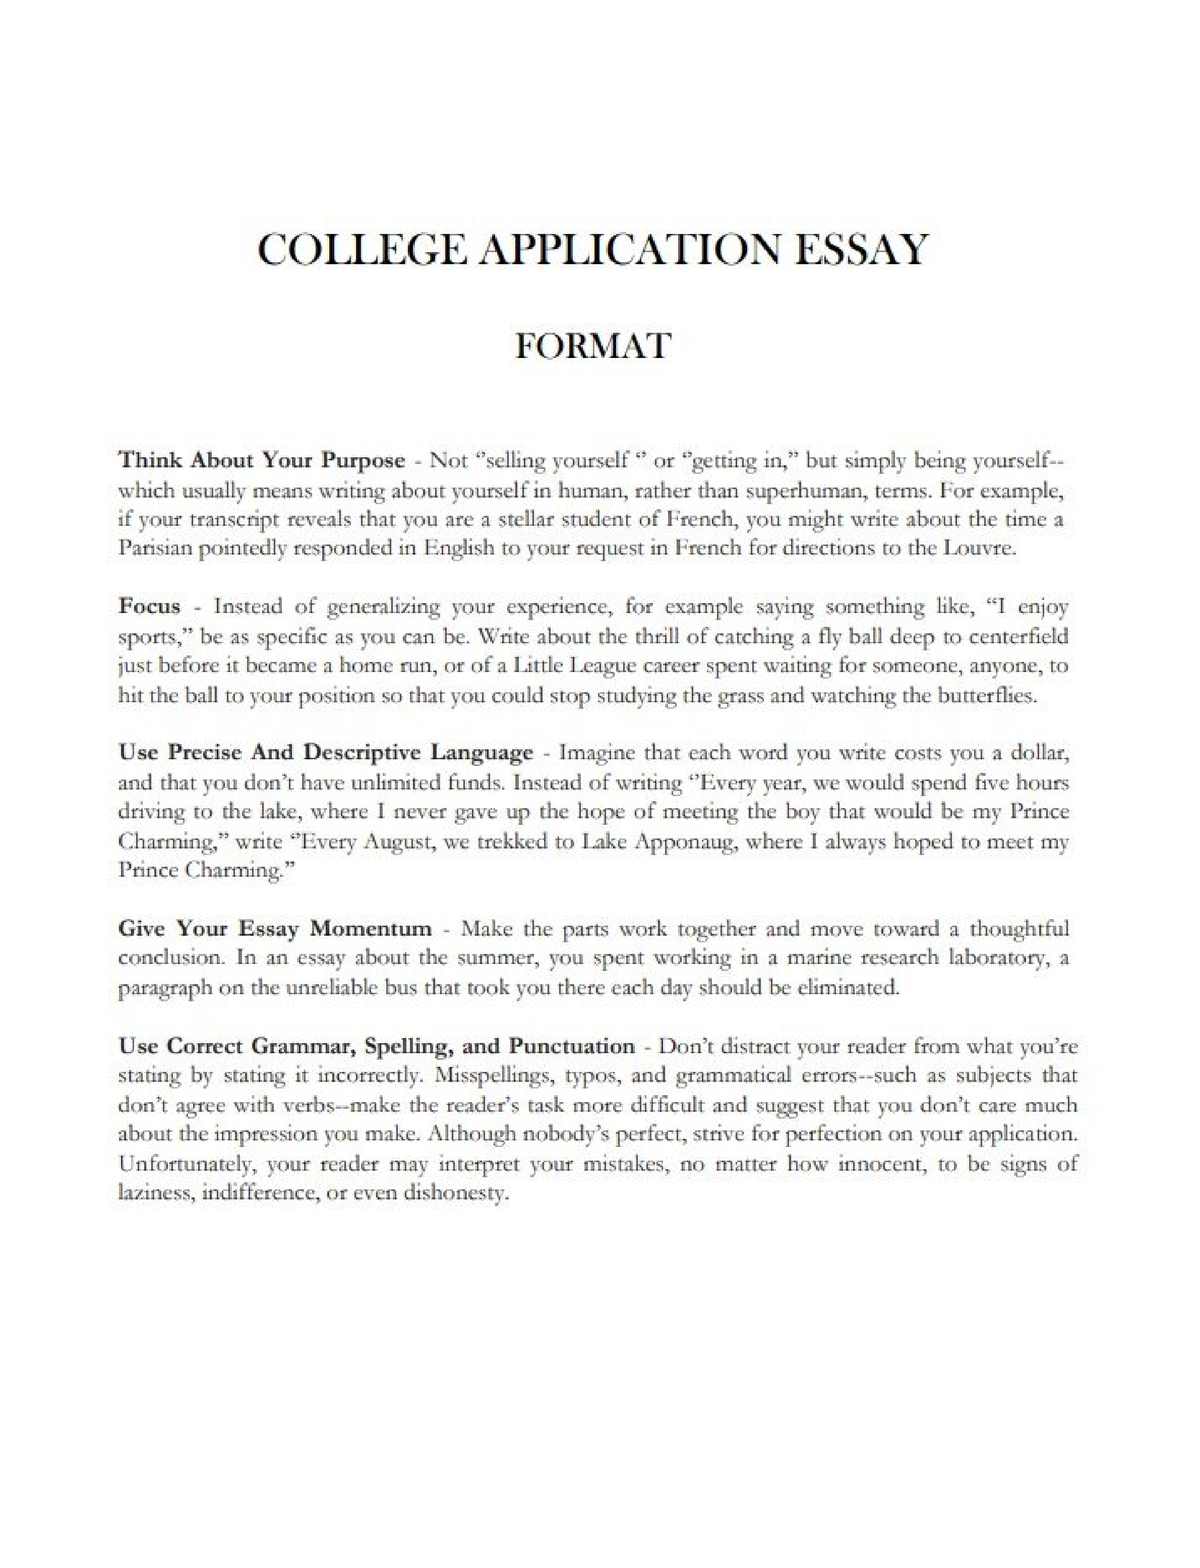 cite sources in a college application essay